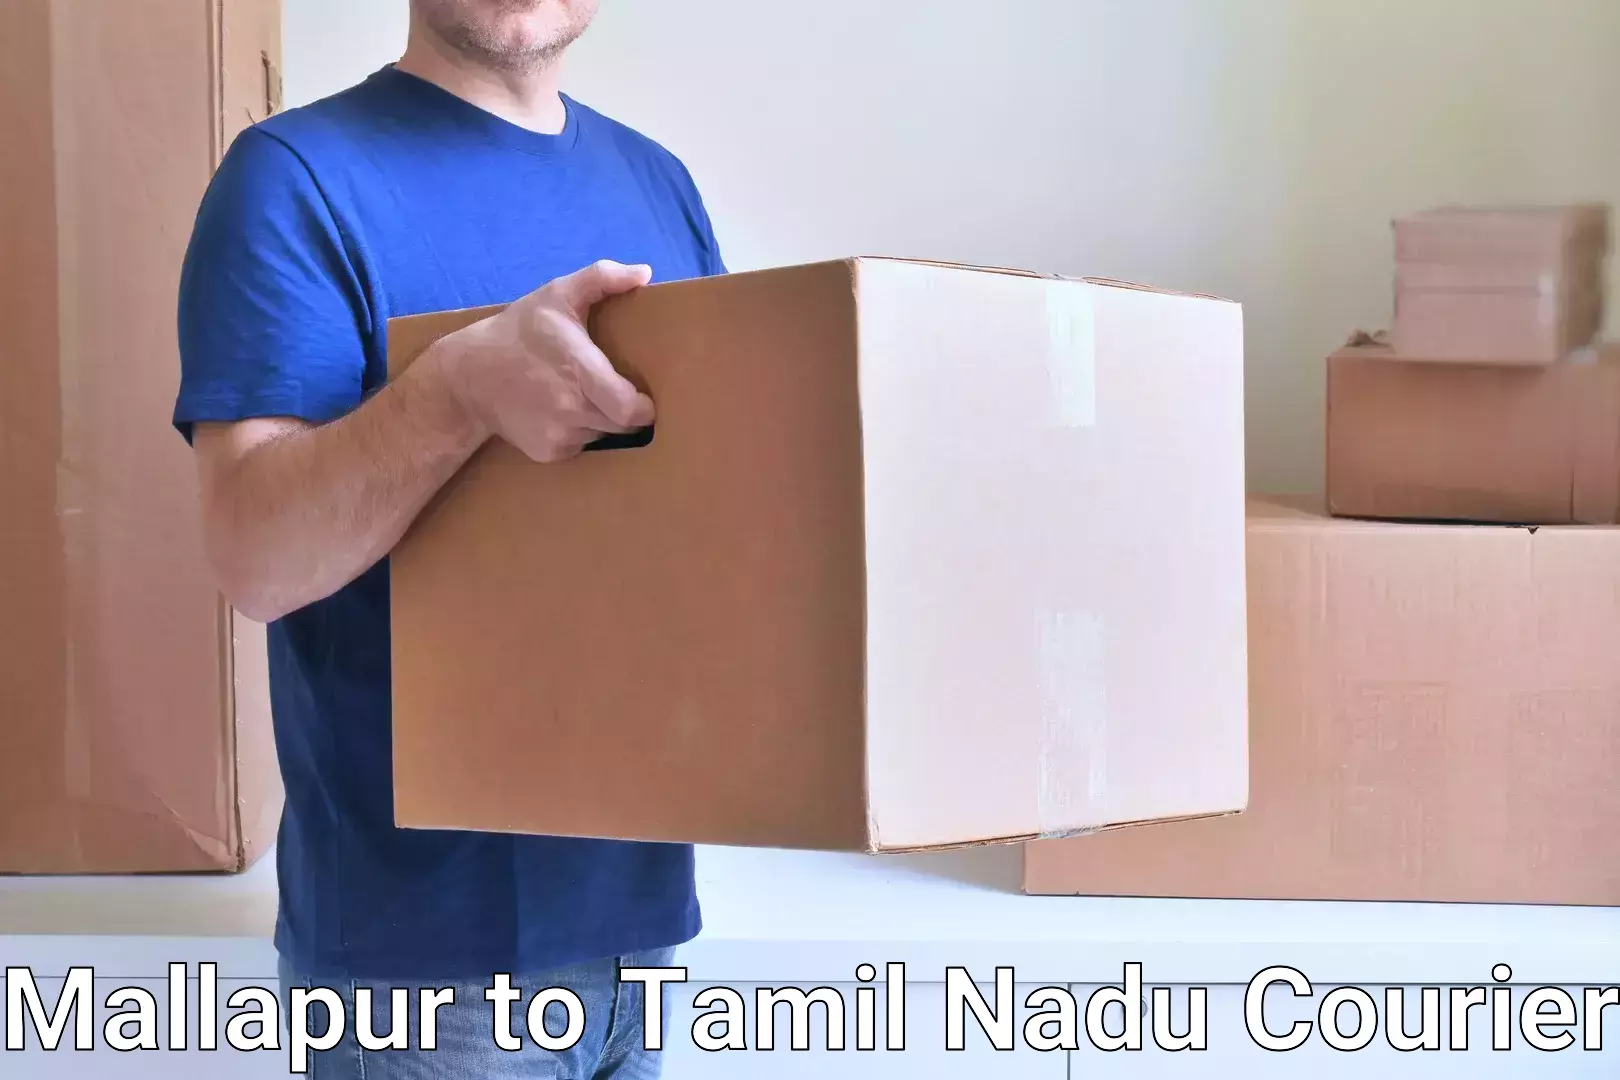 Residential courier service in Mallapur to Ennore Port Chennai